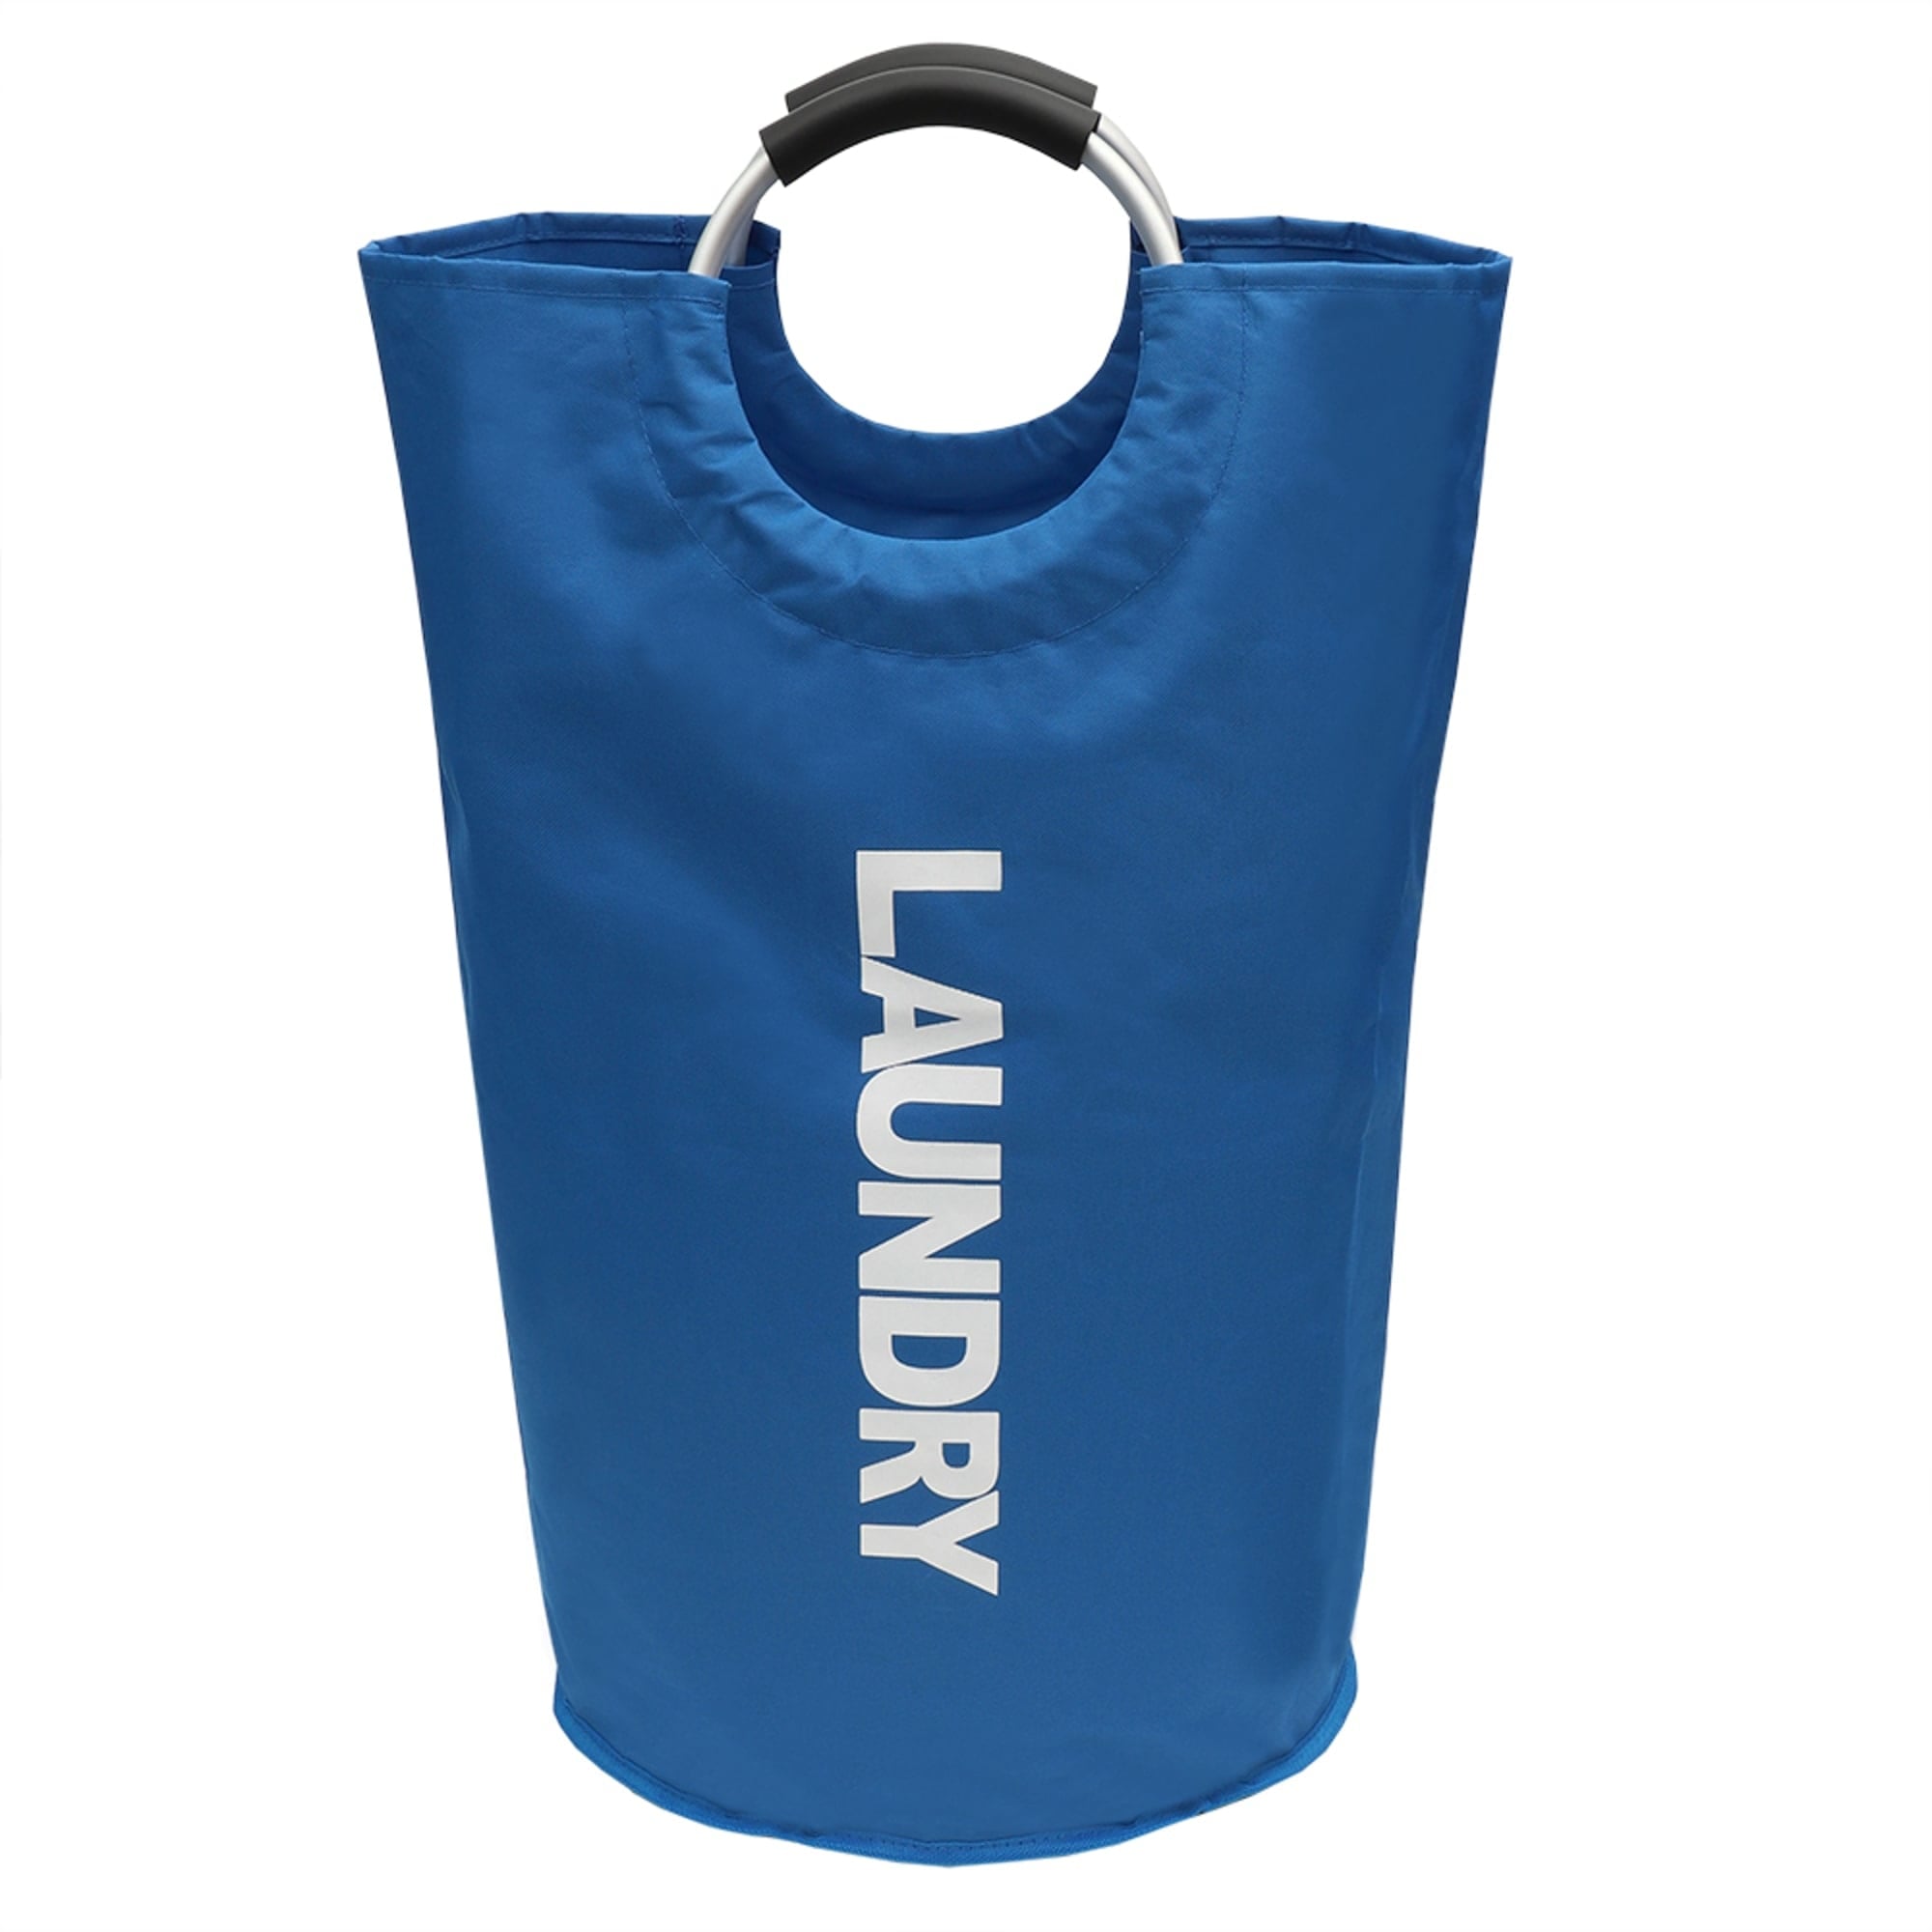 Home Basics Laundry Bag with Soft Grip Handle, Blue $12.00 EACH, CASE PACK OF 12